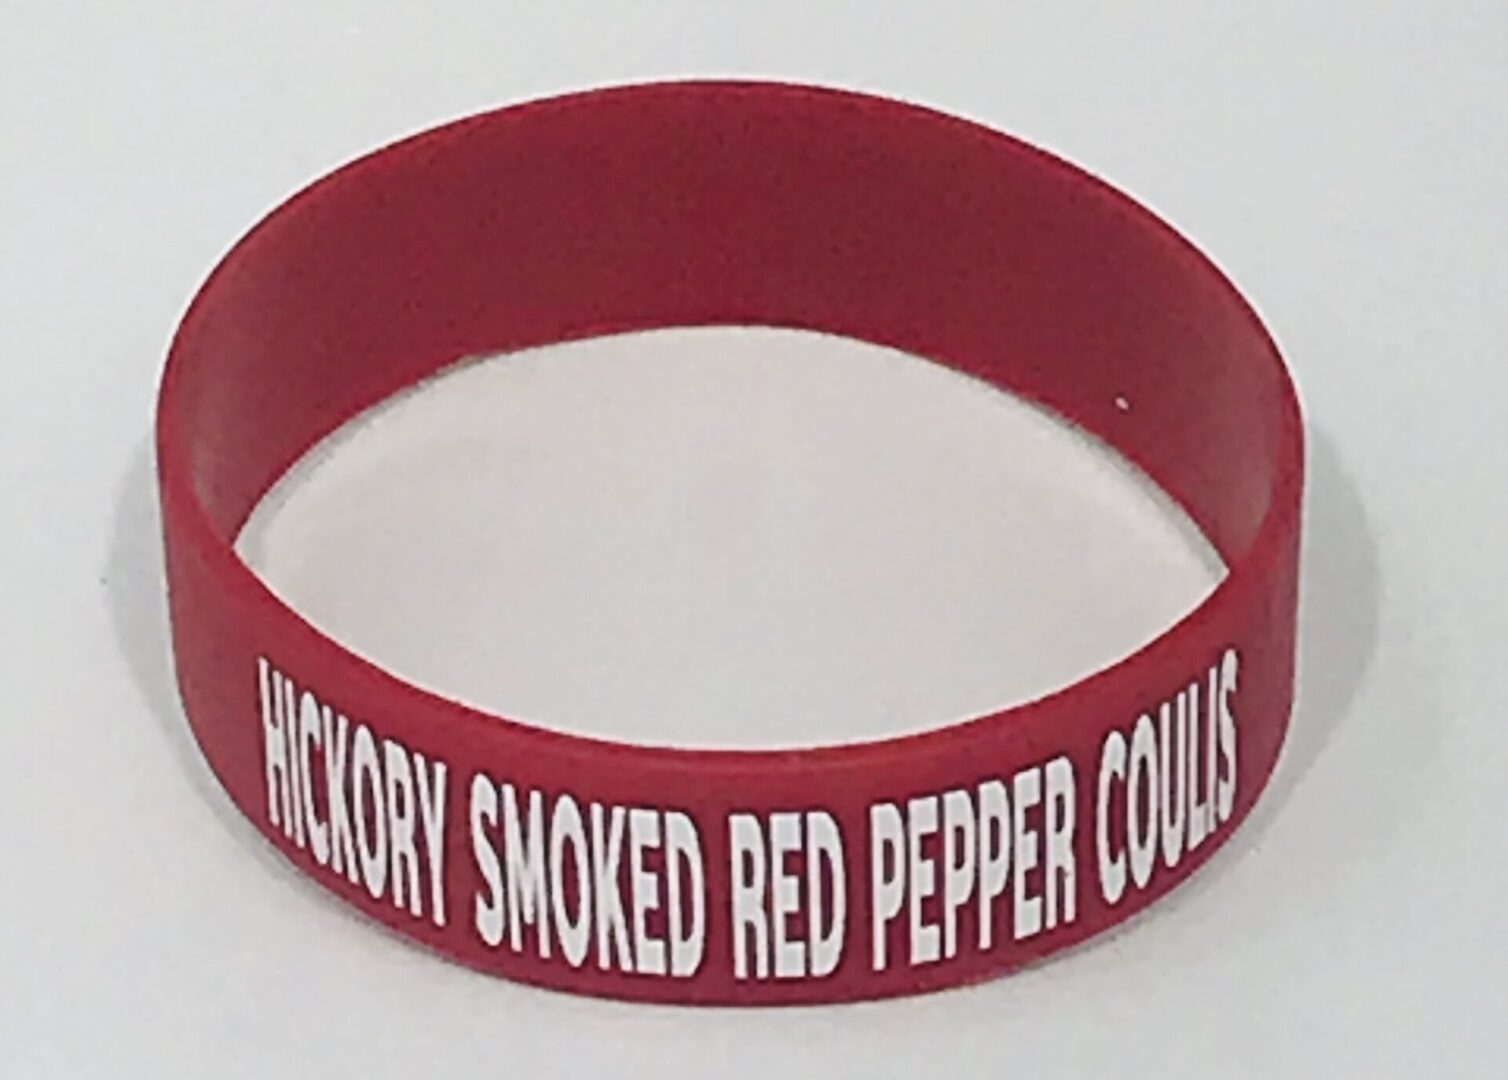 Hickory Smoked Red Pepper Coulis